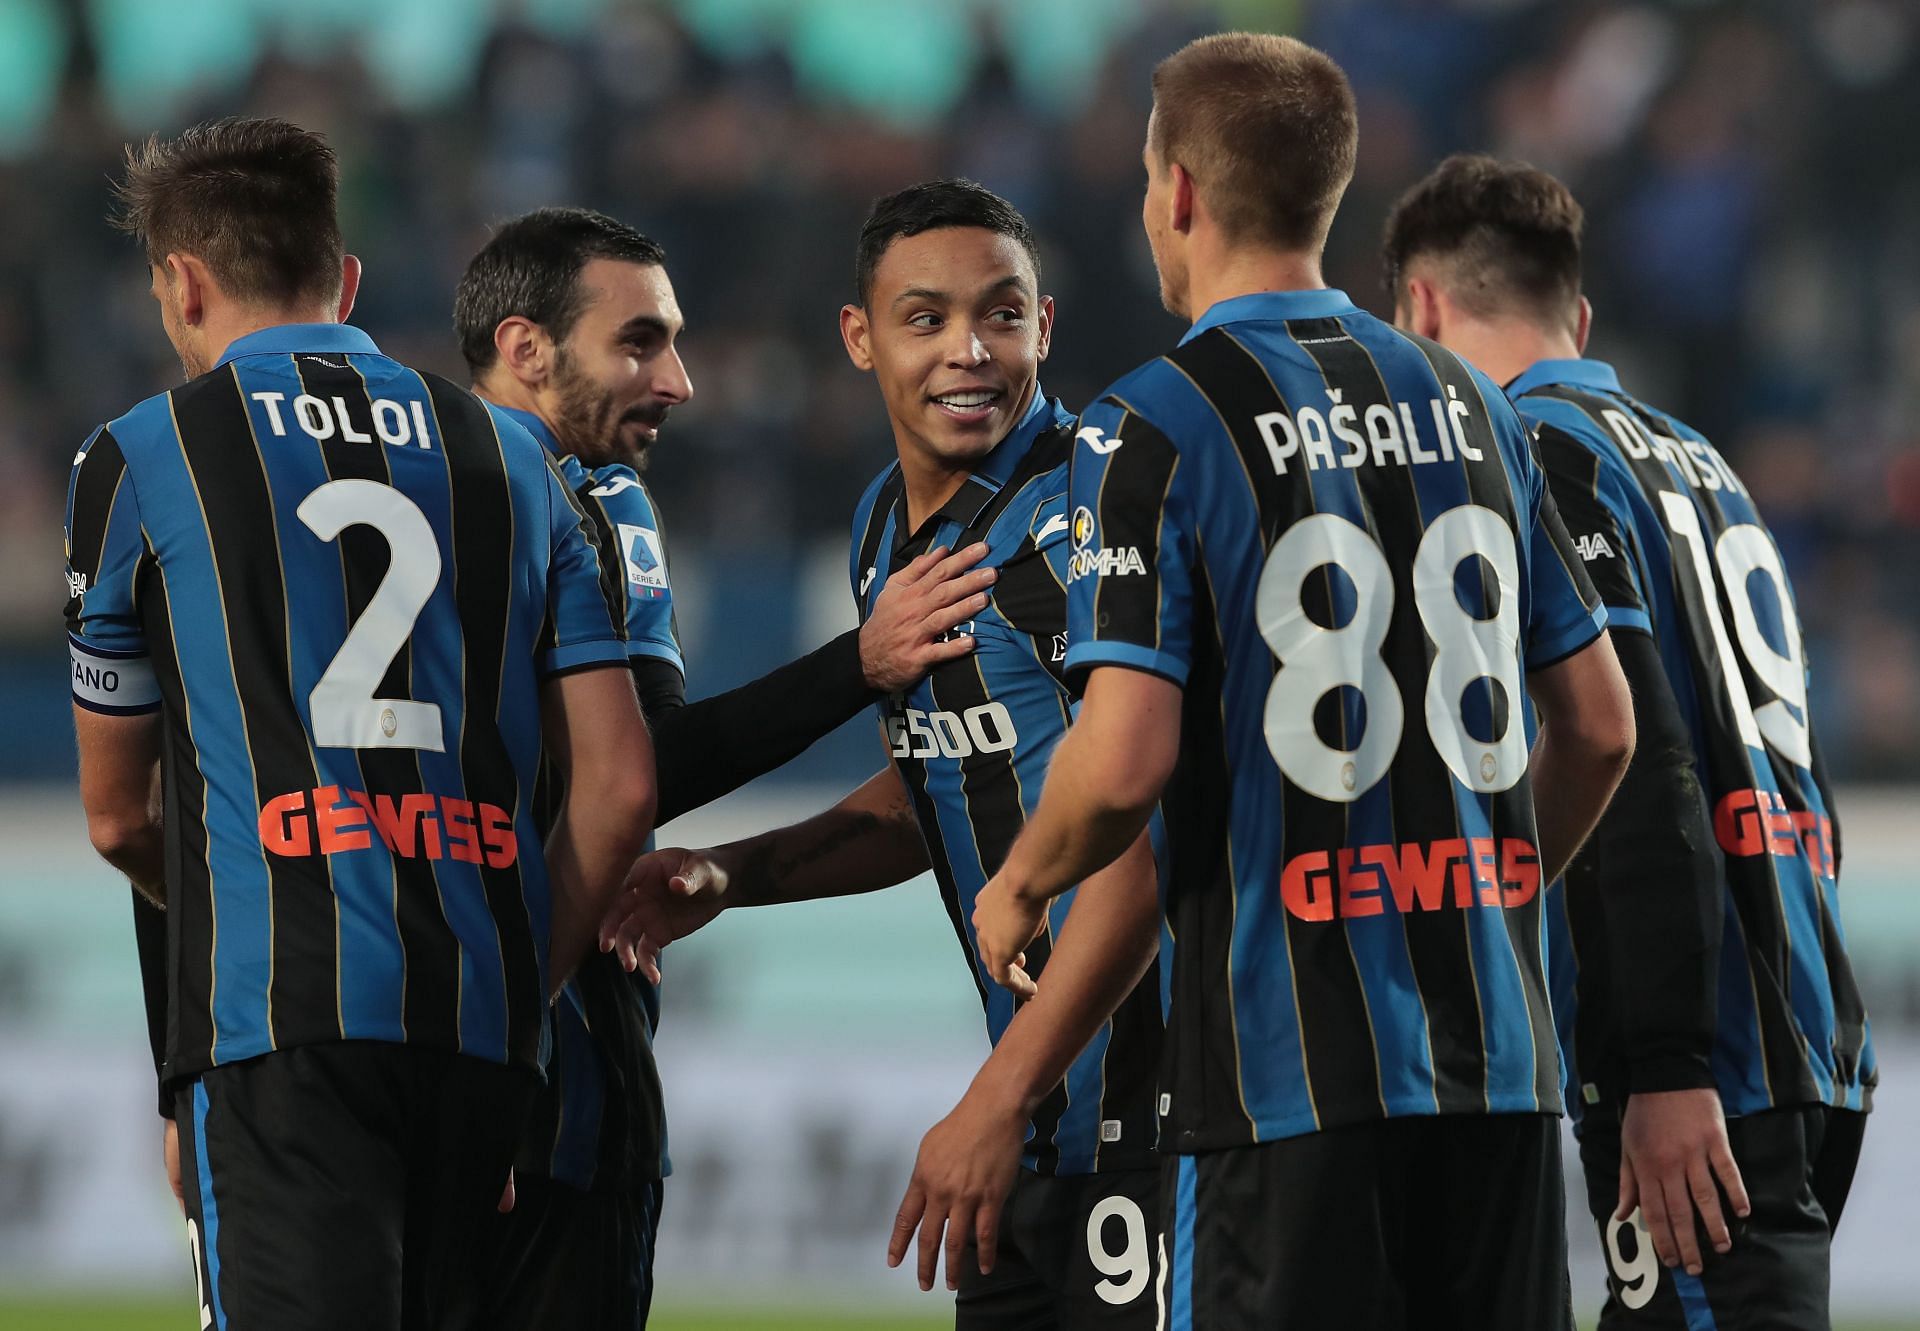 Atalanta will be looking to continue their good run of form with a win against Venezia on Tuesday